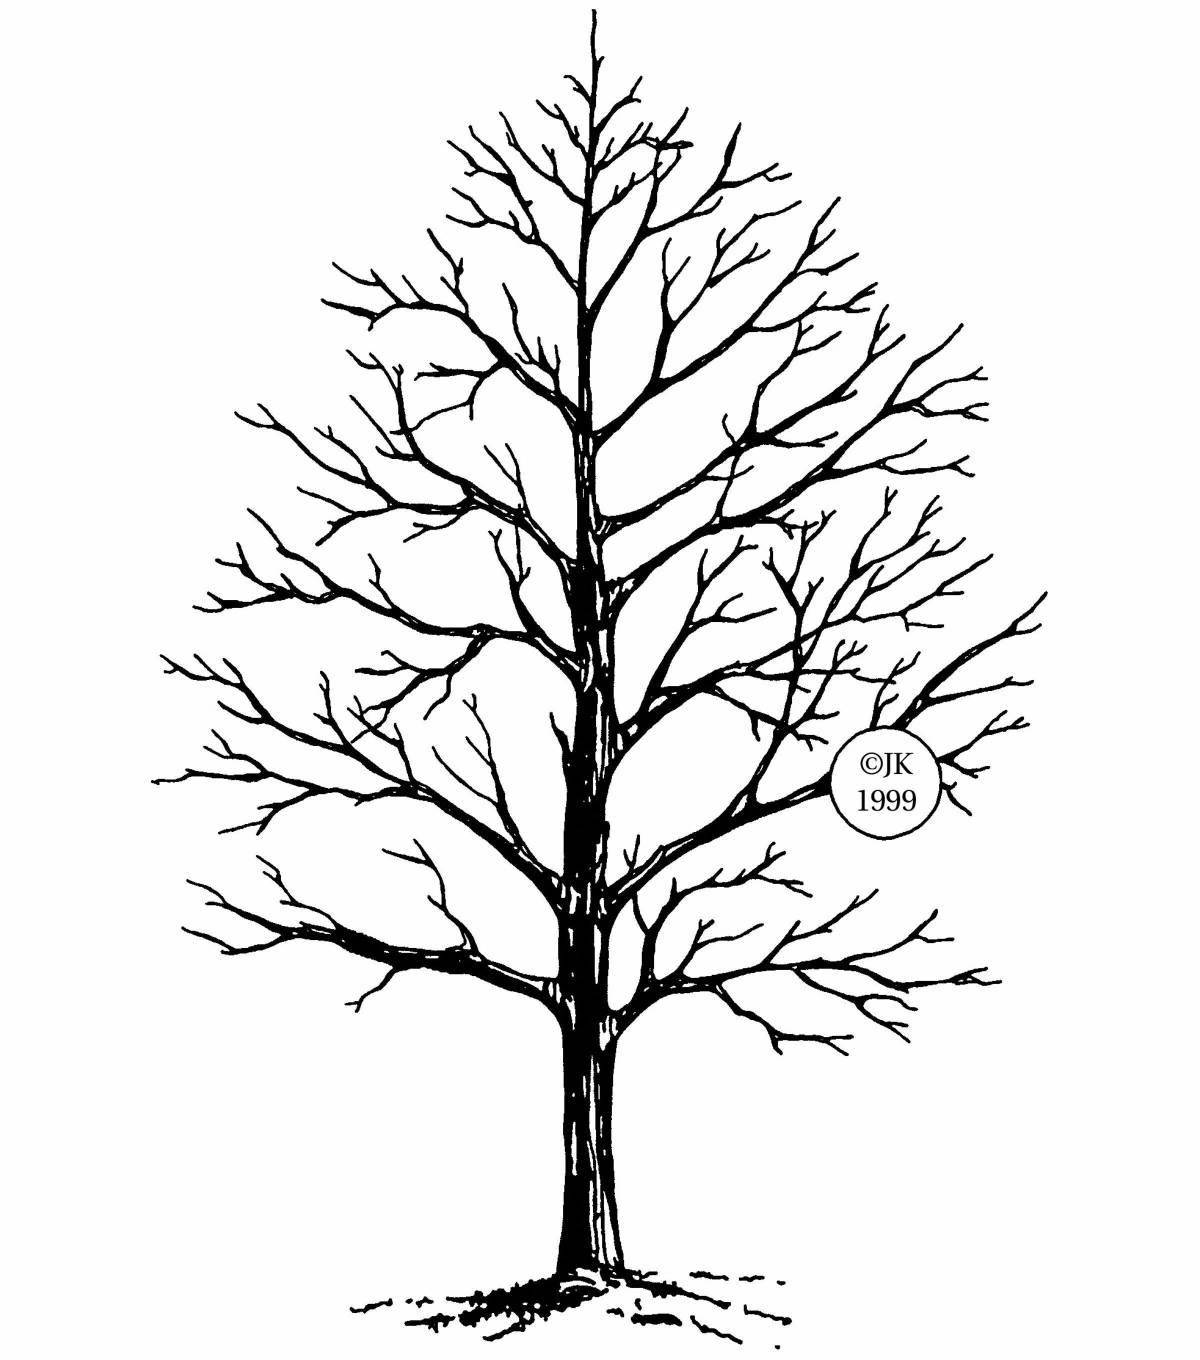 Coloring book glowing branchy tree